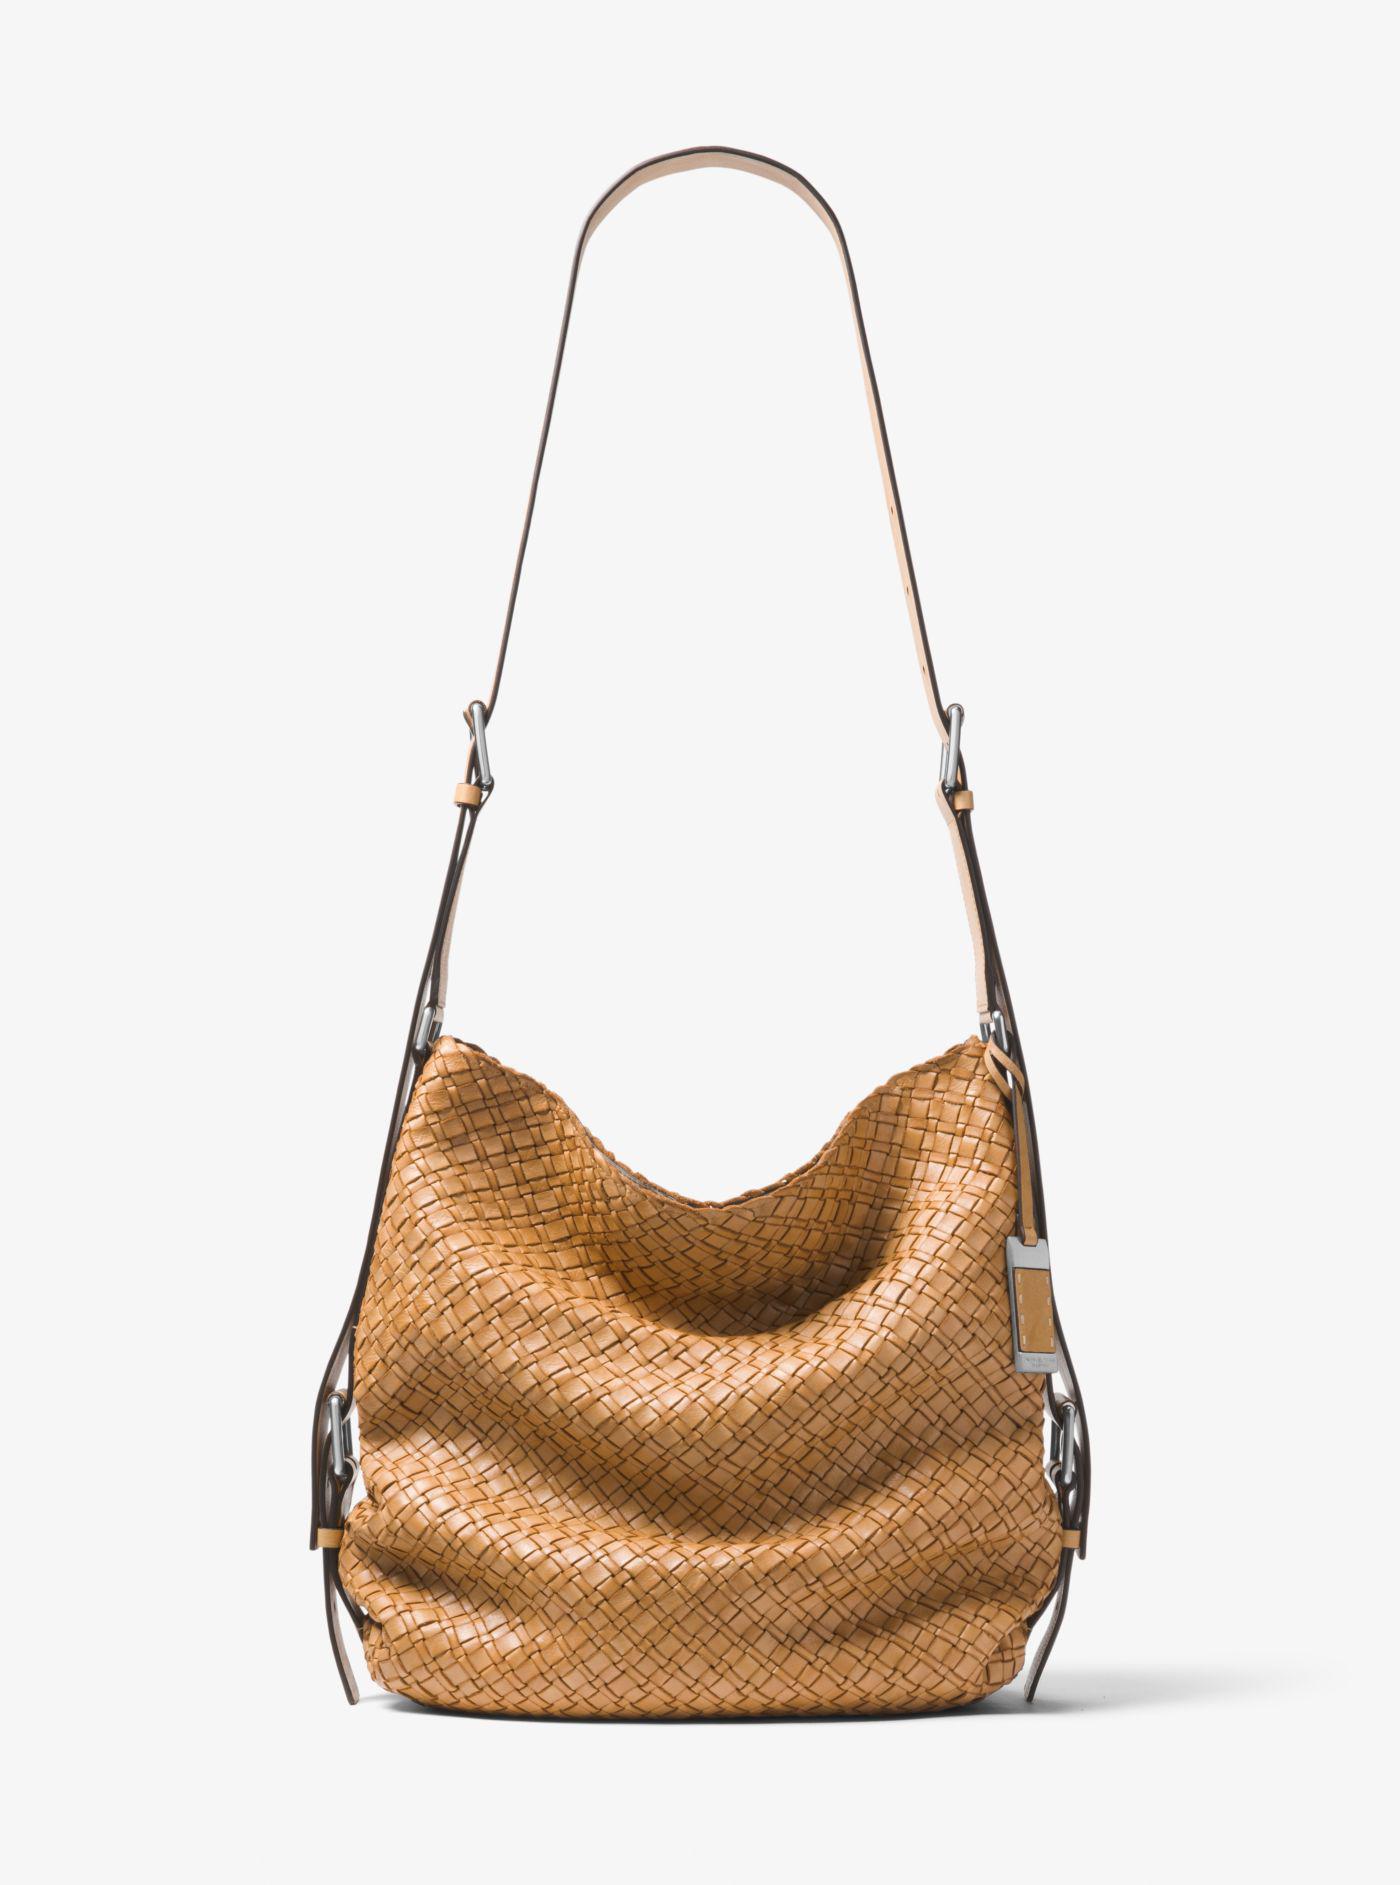 Lyst - Michael Kors Naomi Extra-large Woven Leather Shoulder Bag in Brown